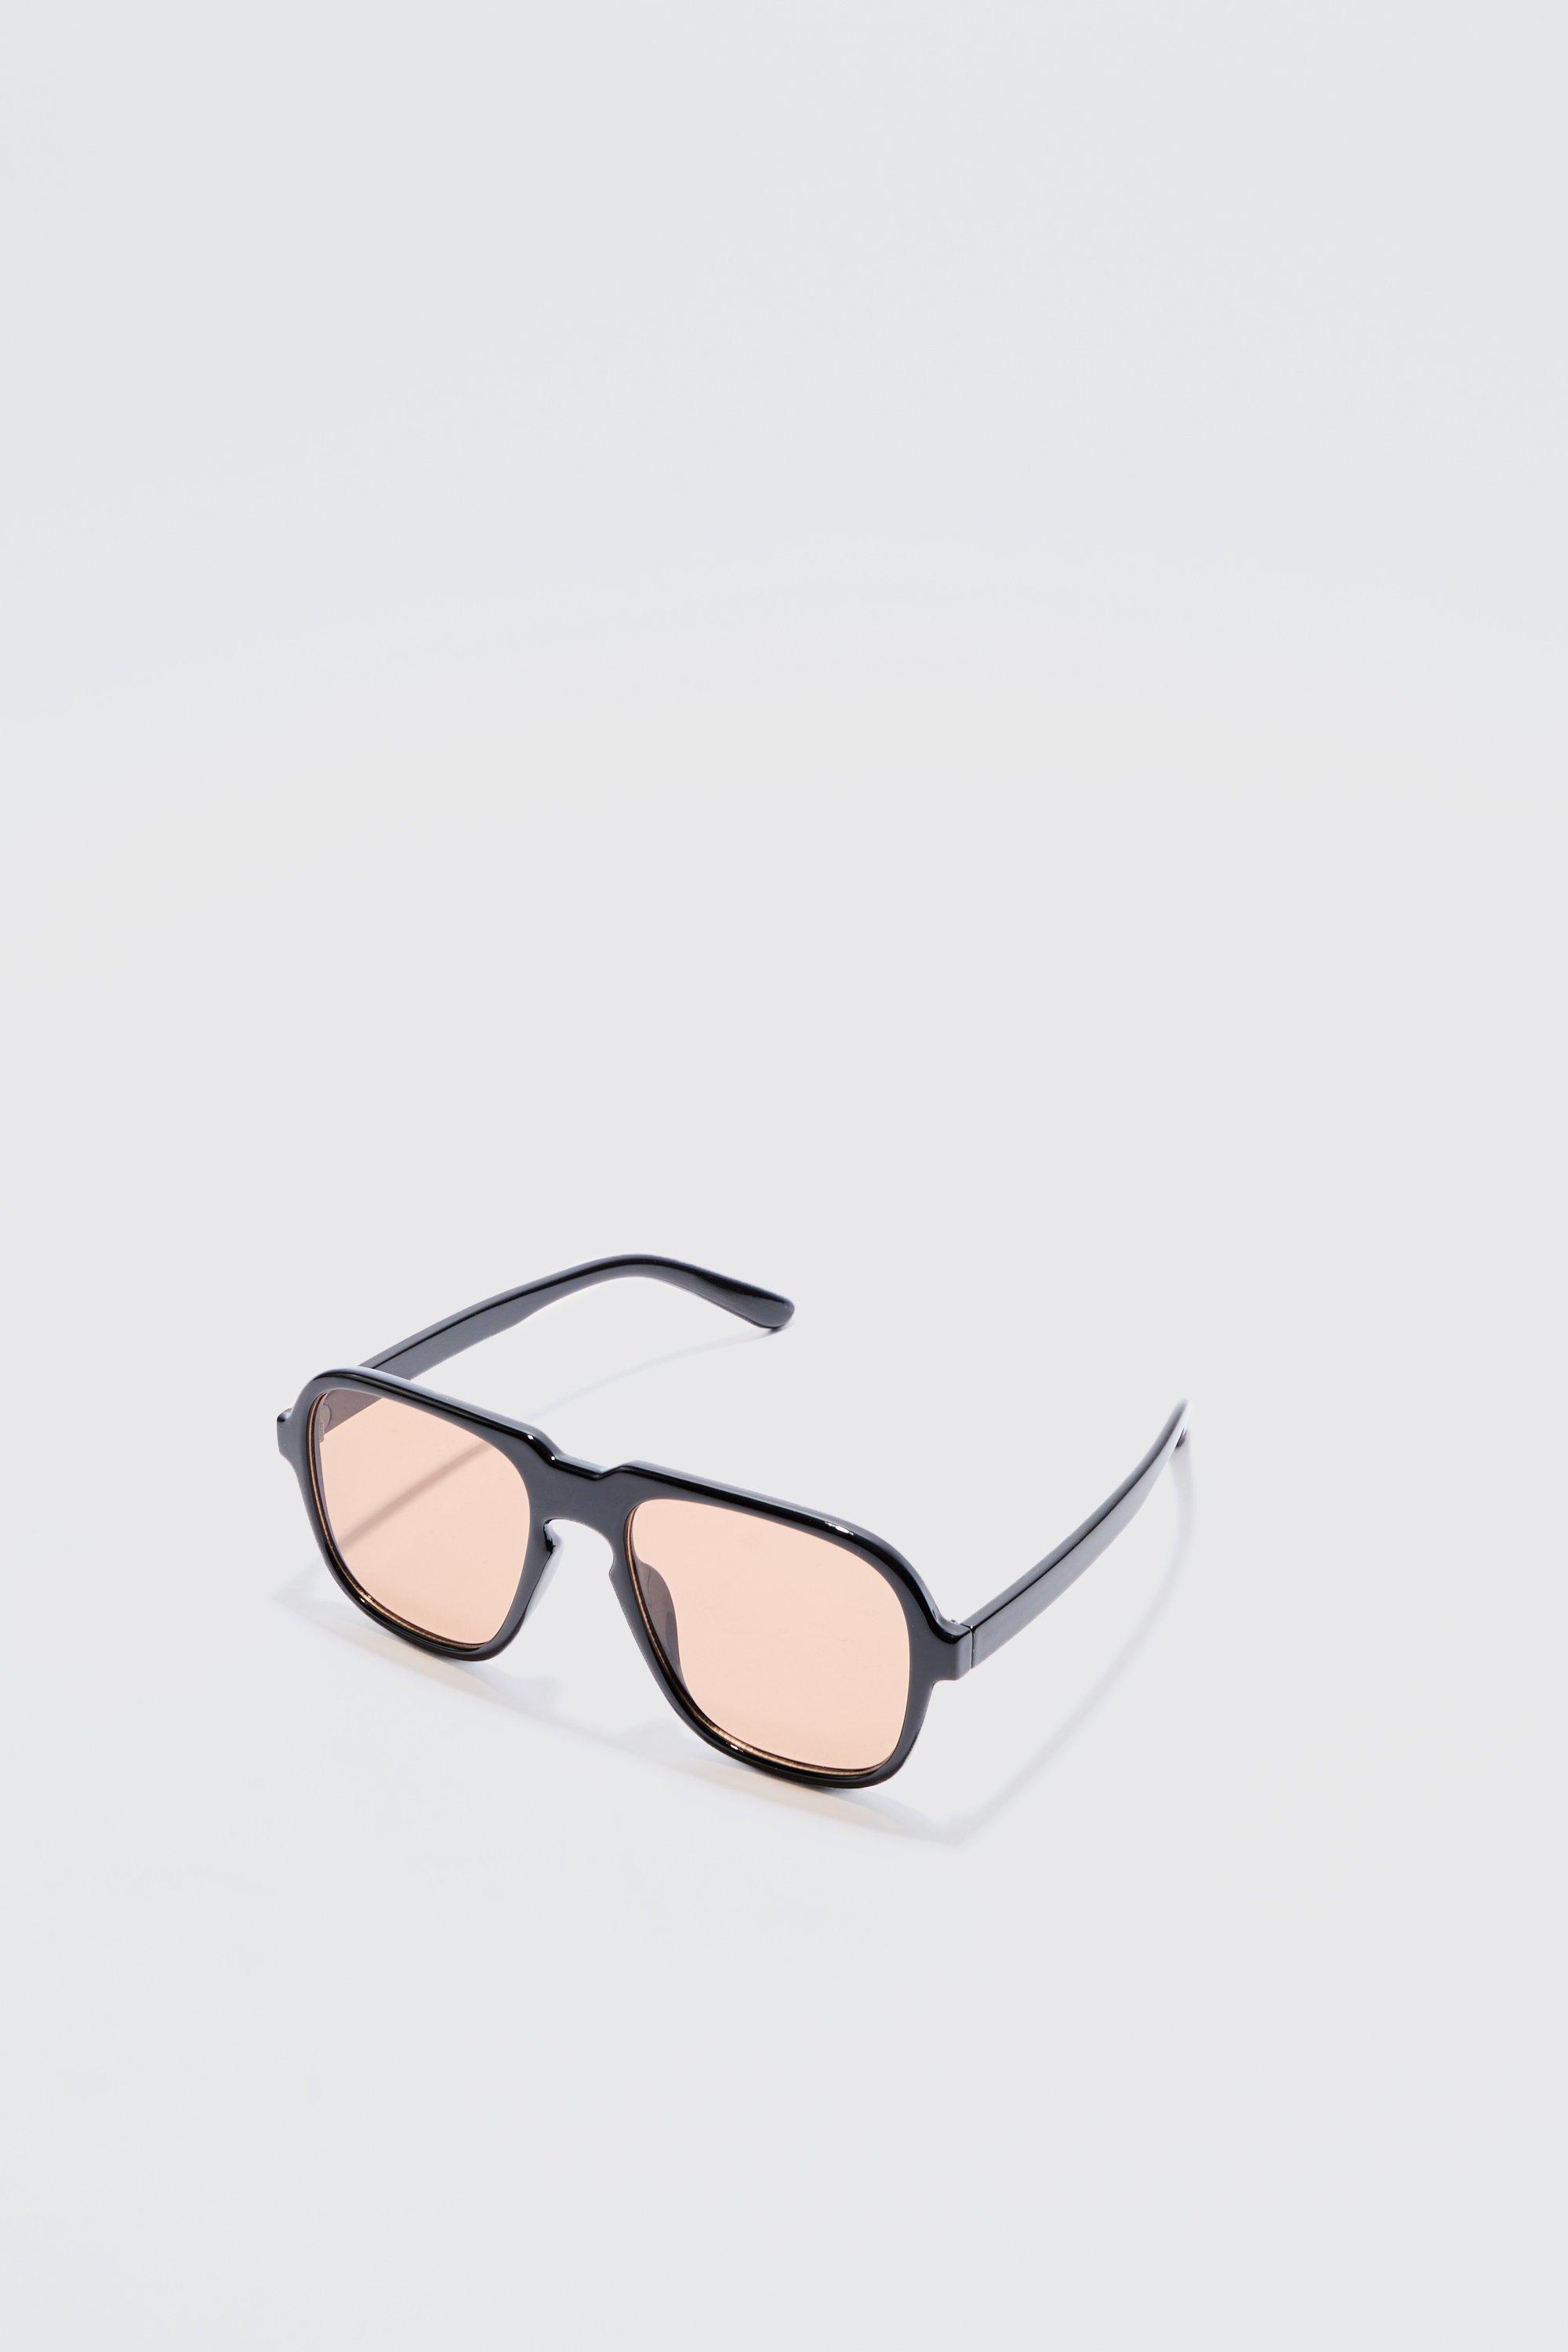 Image of Retro High Brow Sunglasses With Brown Lens, Nero